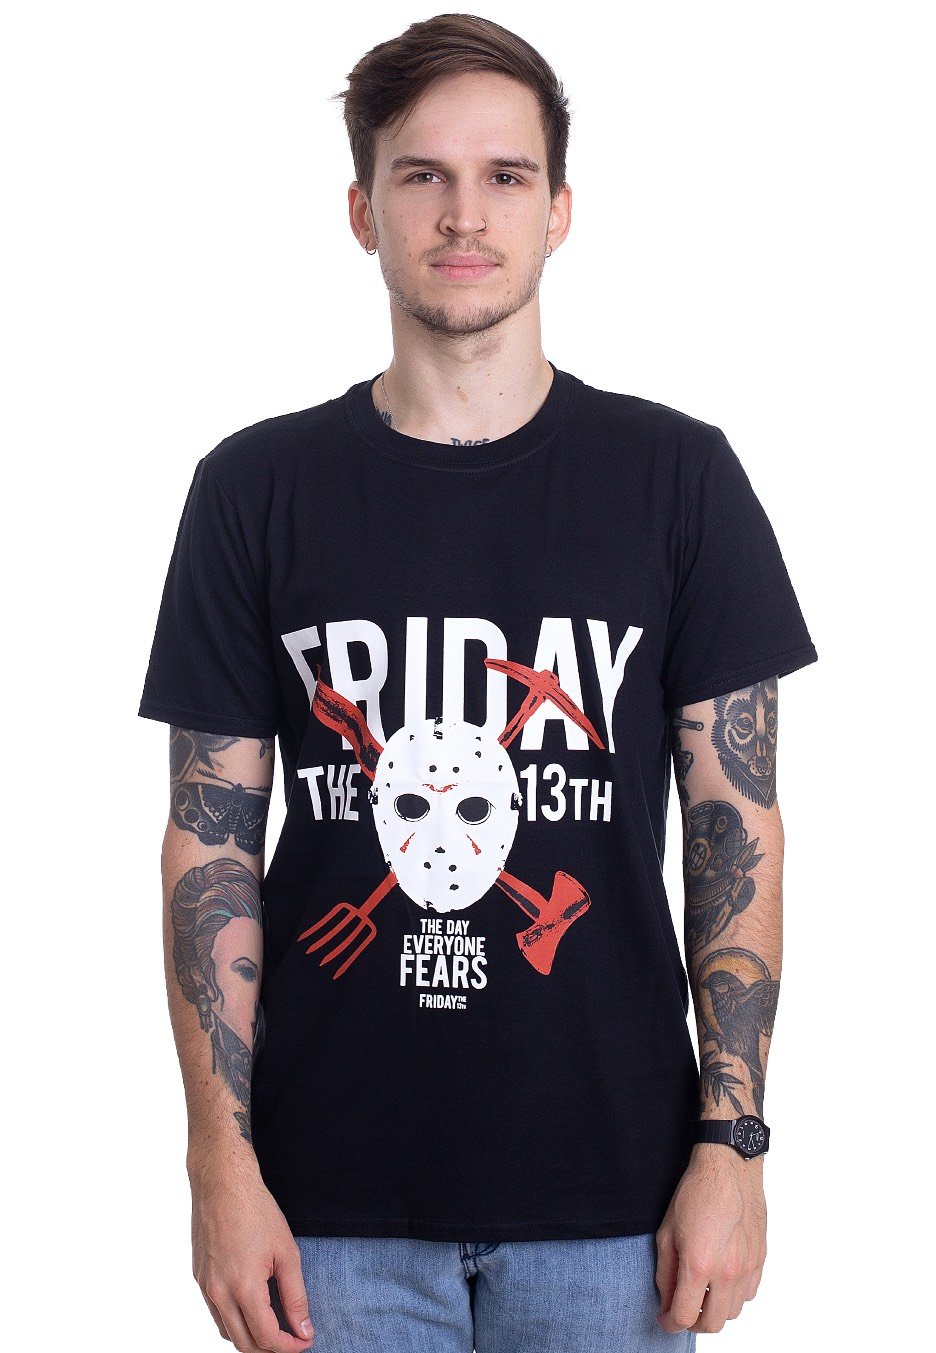 Friday The 13th - The Day Everyone Fears - T-Shirt